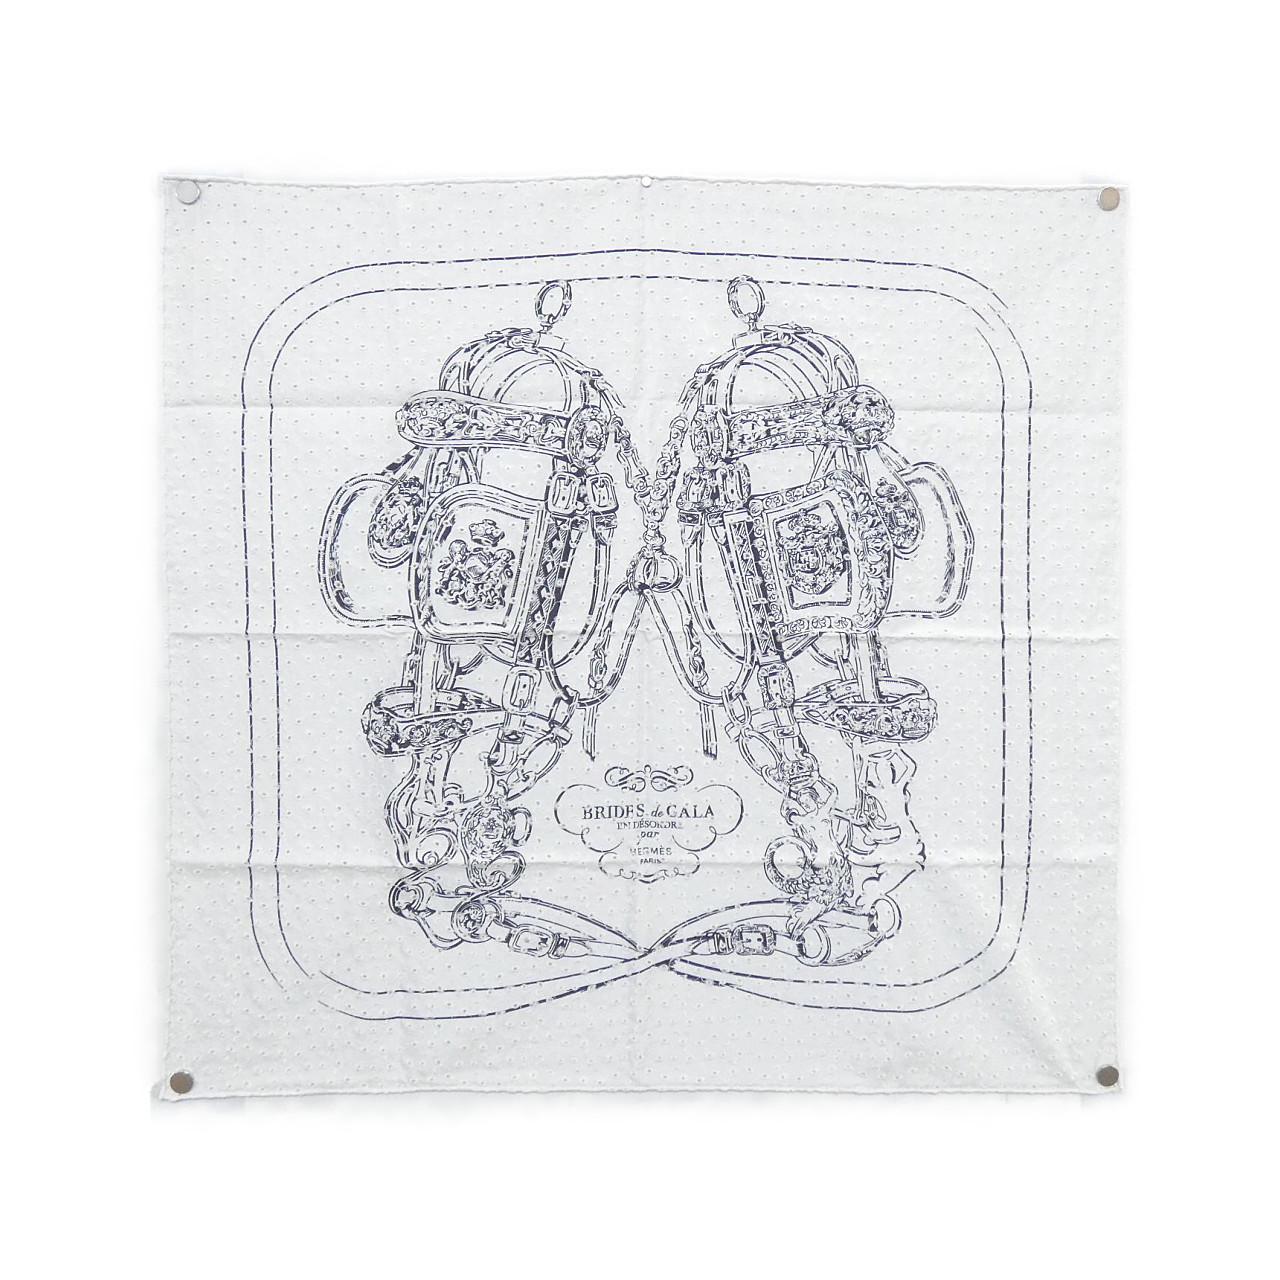 [Unused items] HERMES CARRE BRODERIE ANGLAISE 983529S scarf